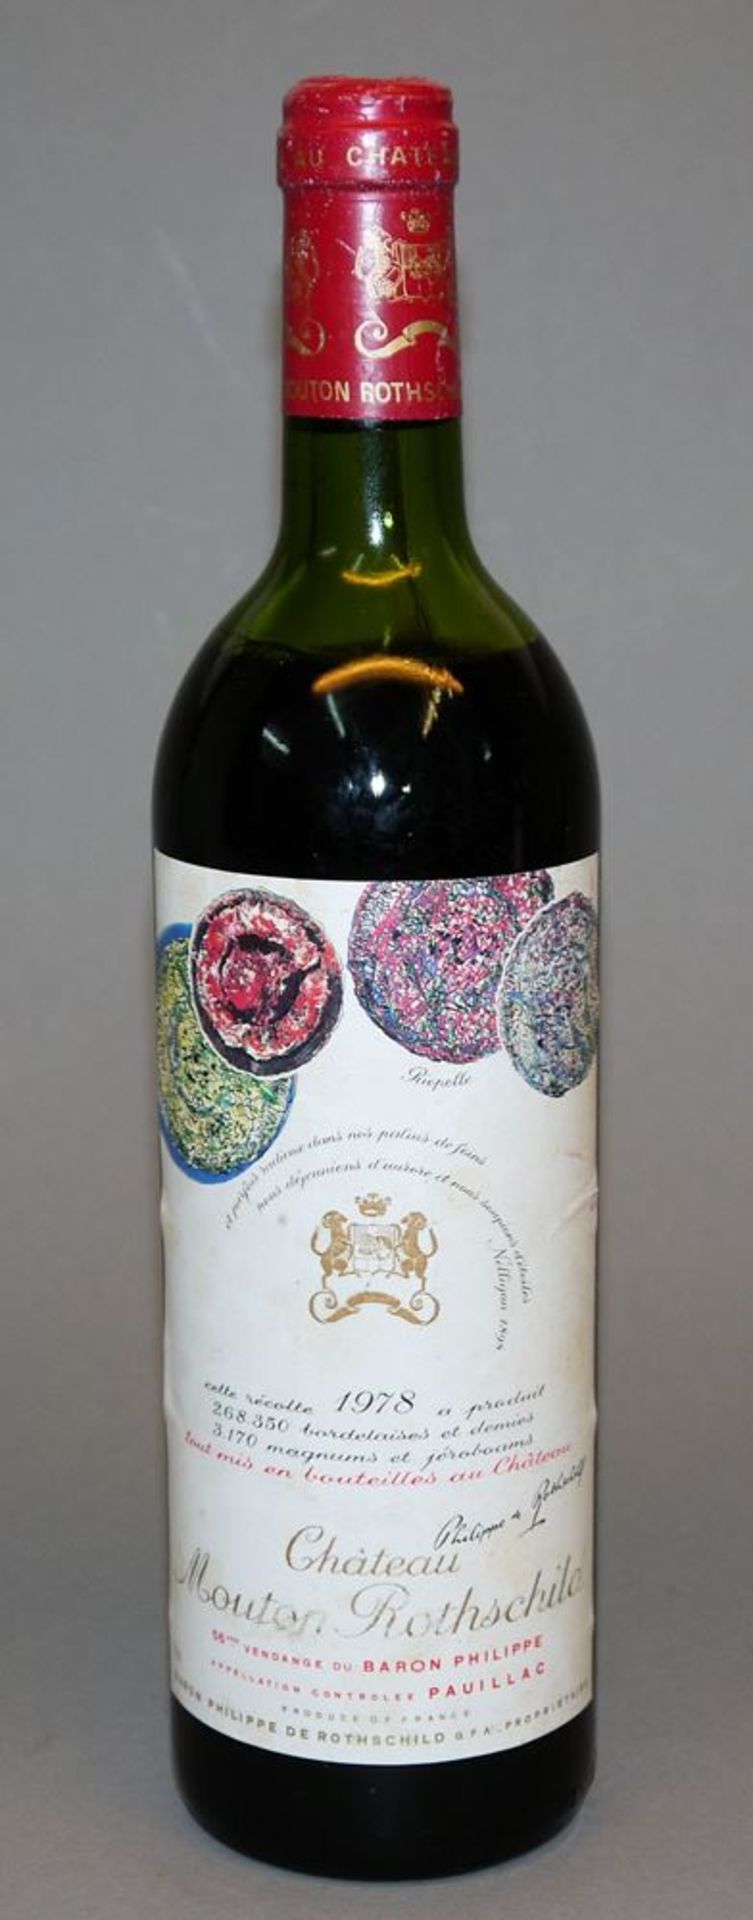 1 bottle 1978 Château Mouton Rothschild with artist label from Riopelle